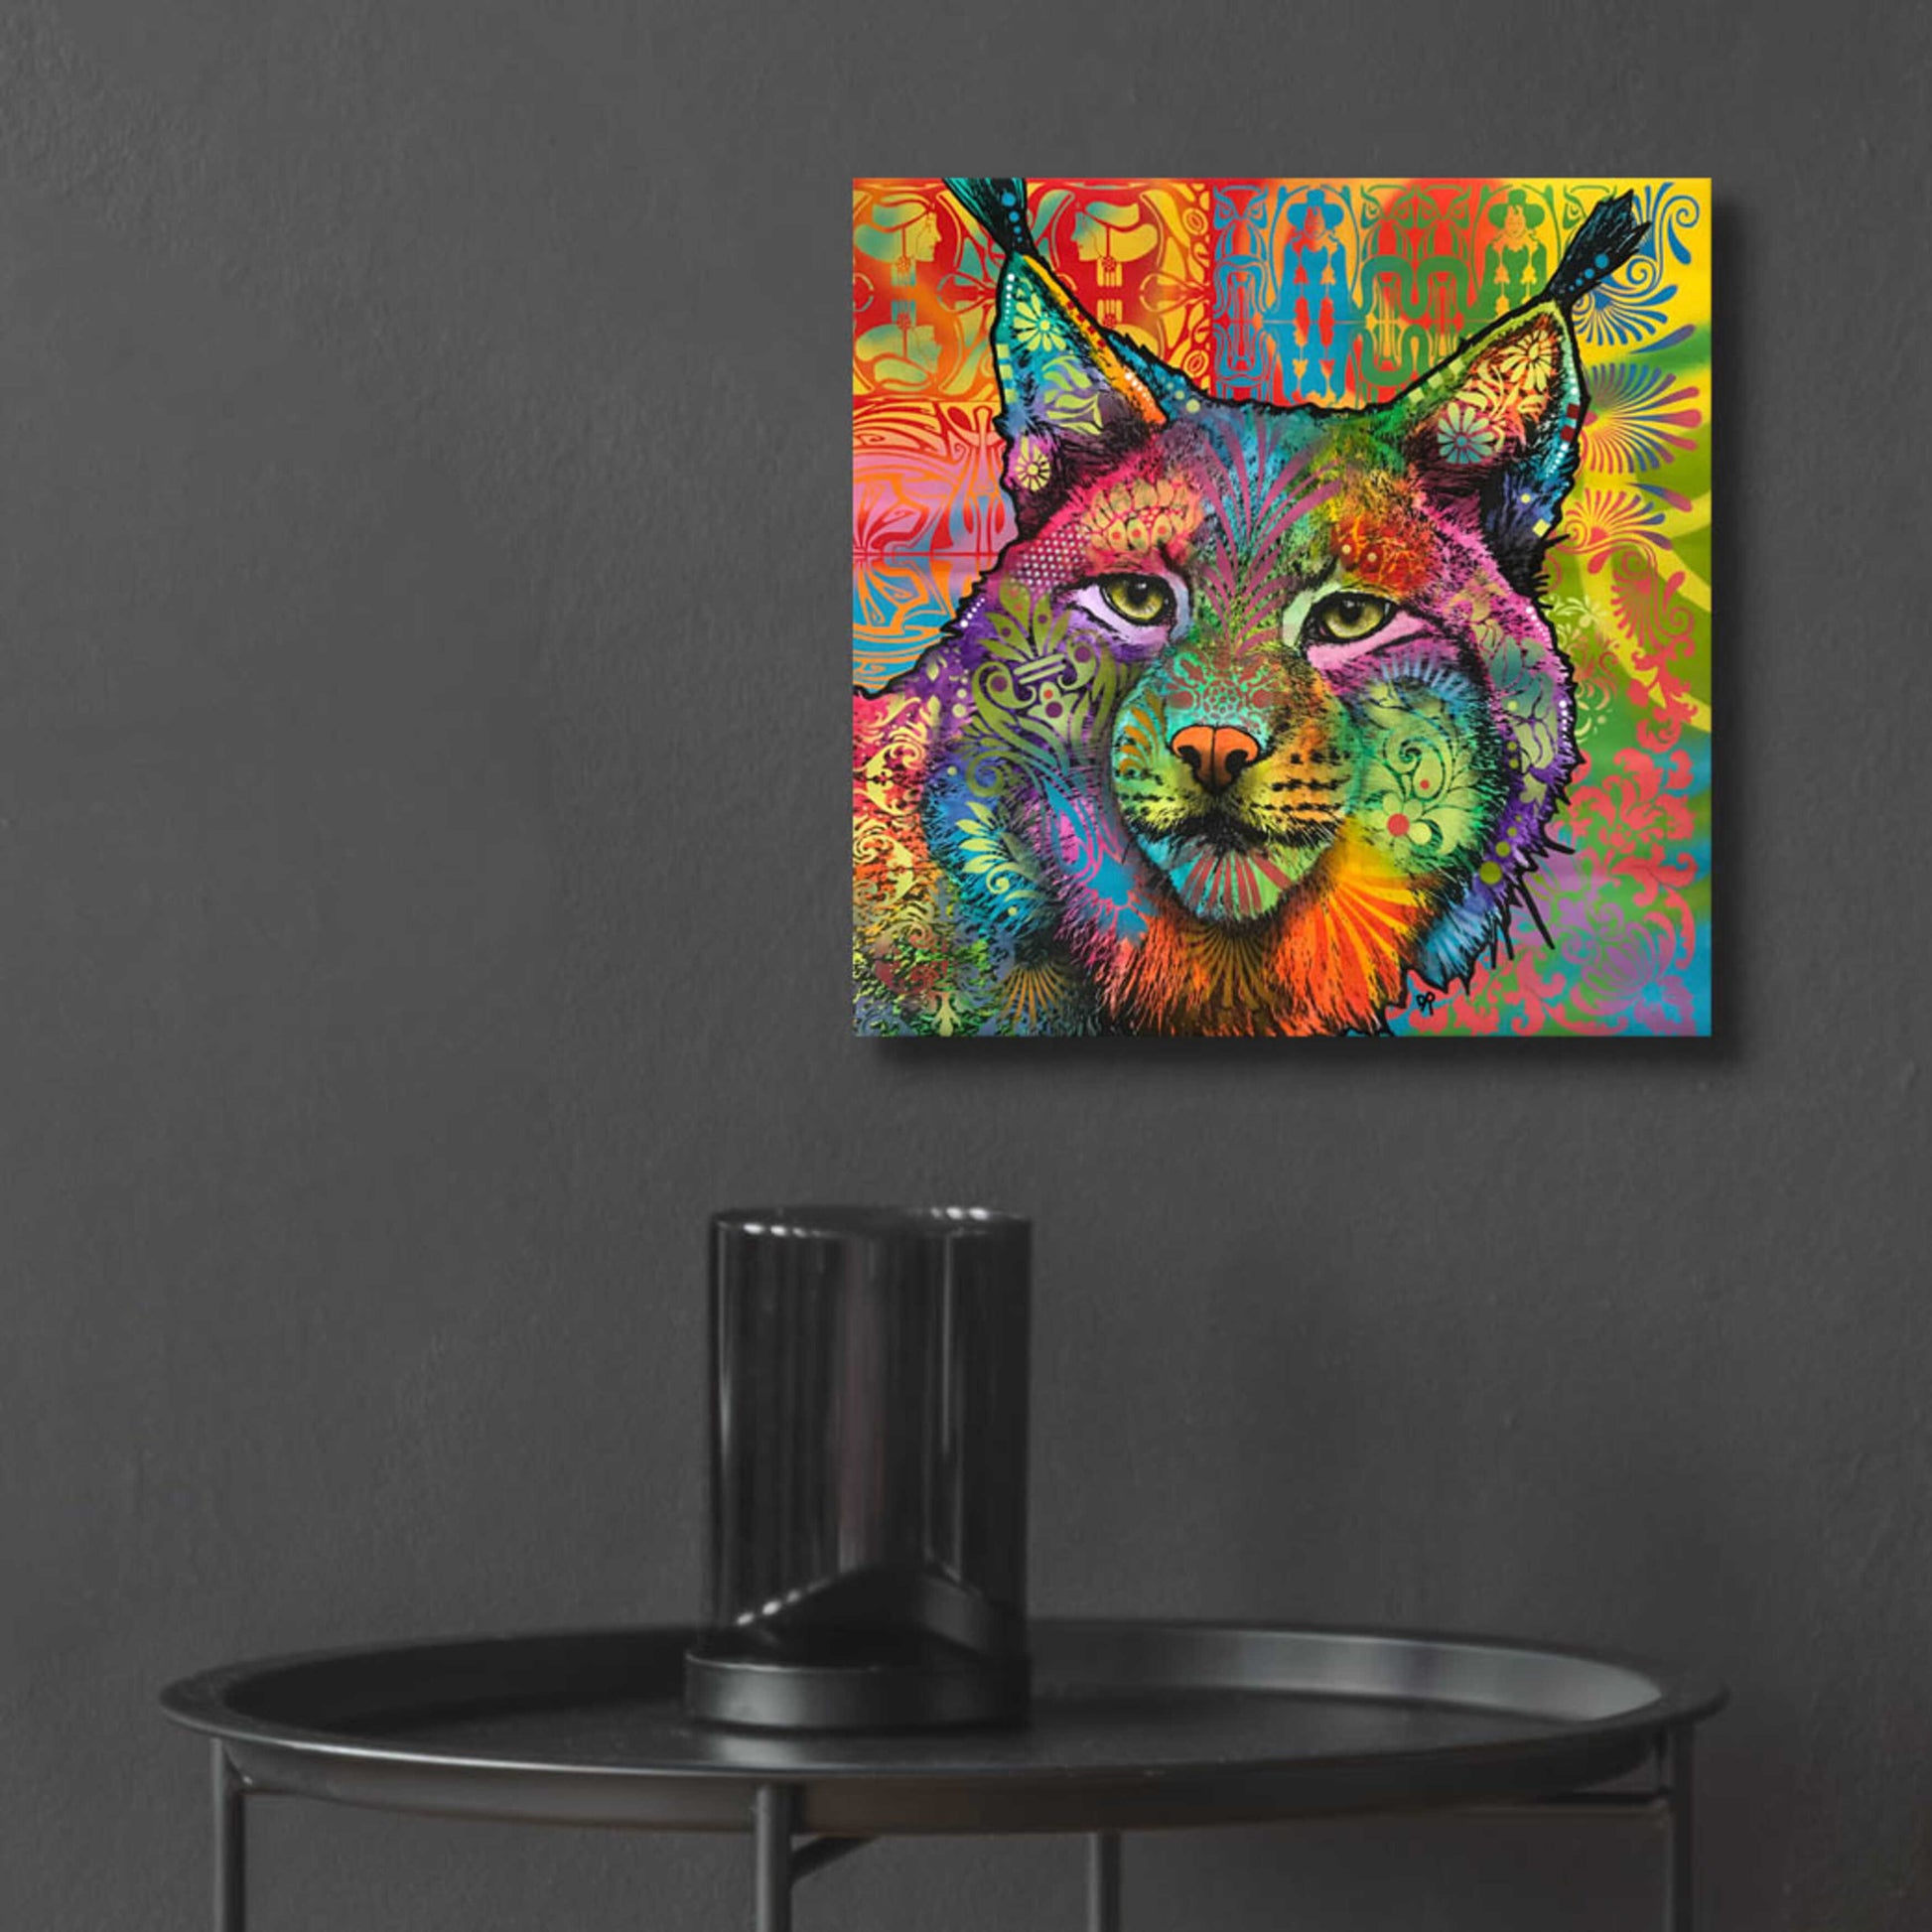 Epic Art 'The Lynx' by Dean Russo, Acrylic Glass Wall Art,12x12